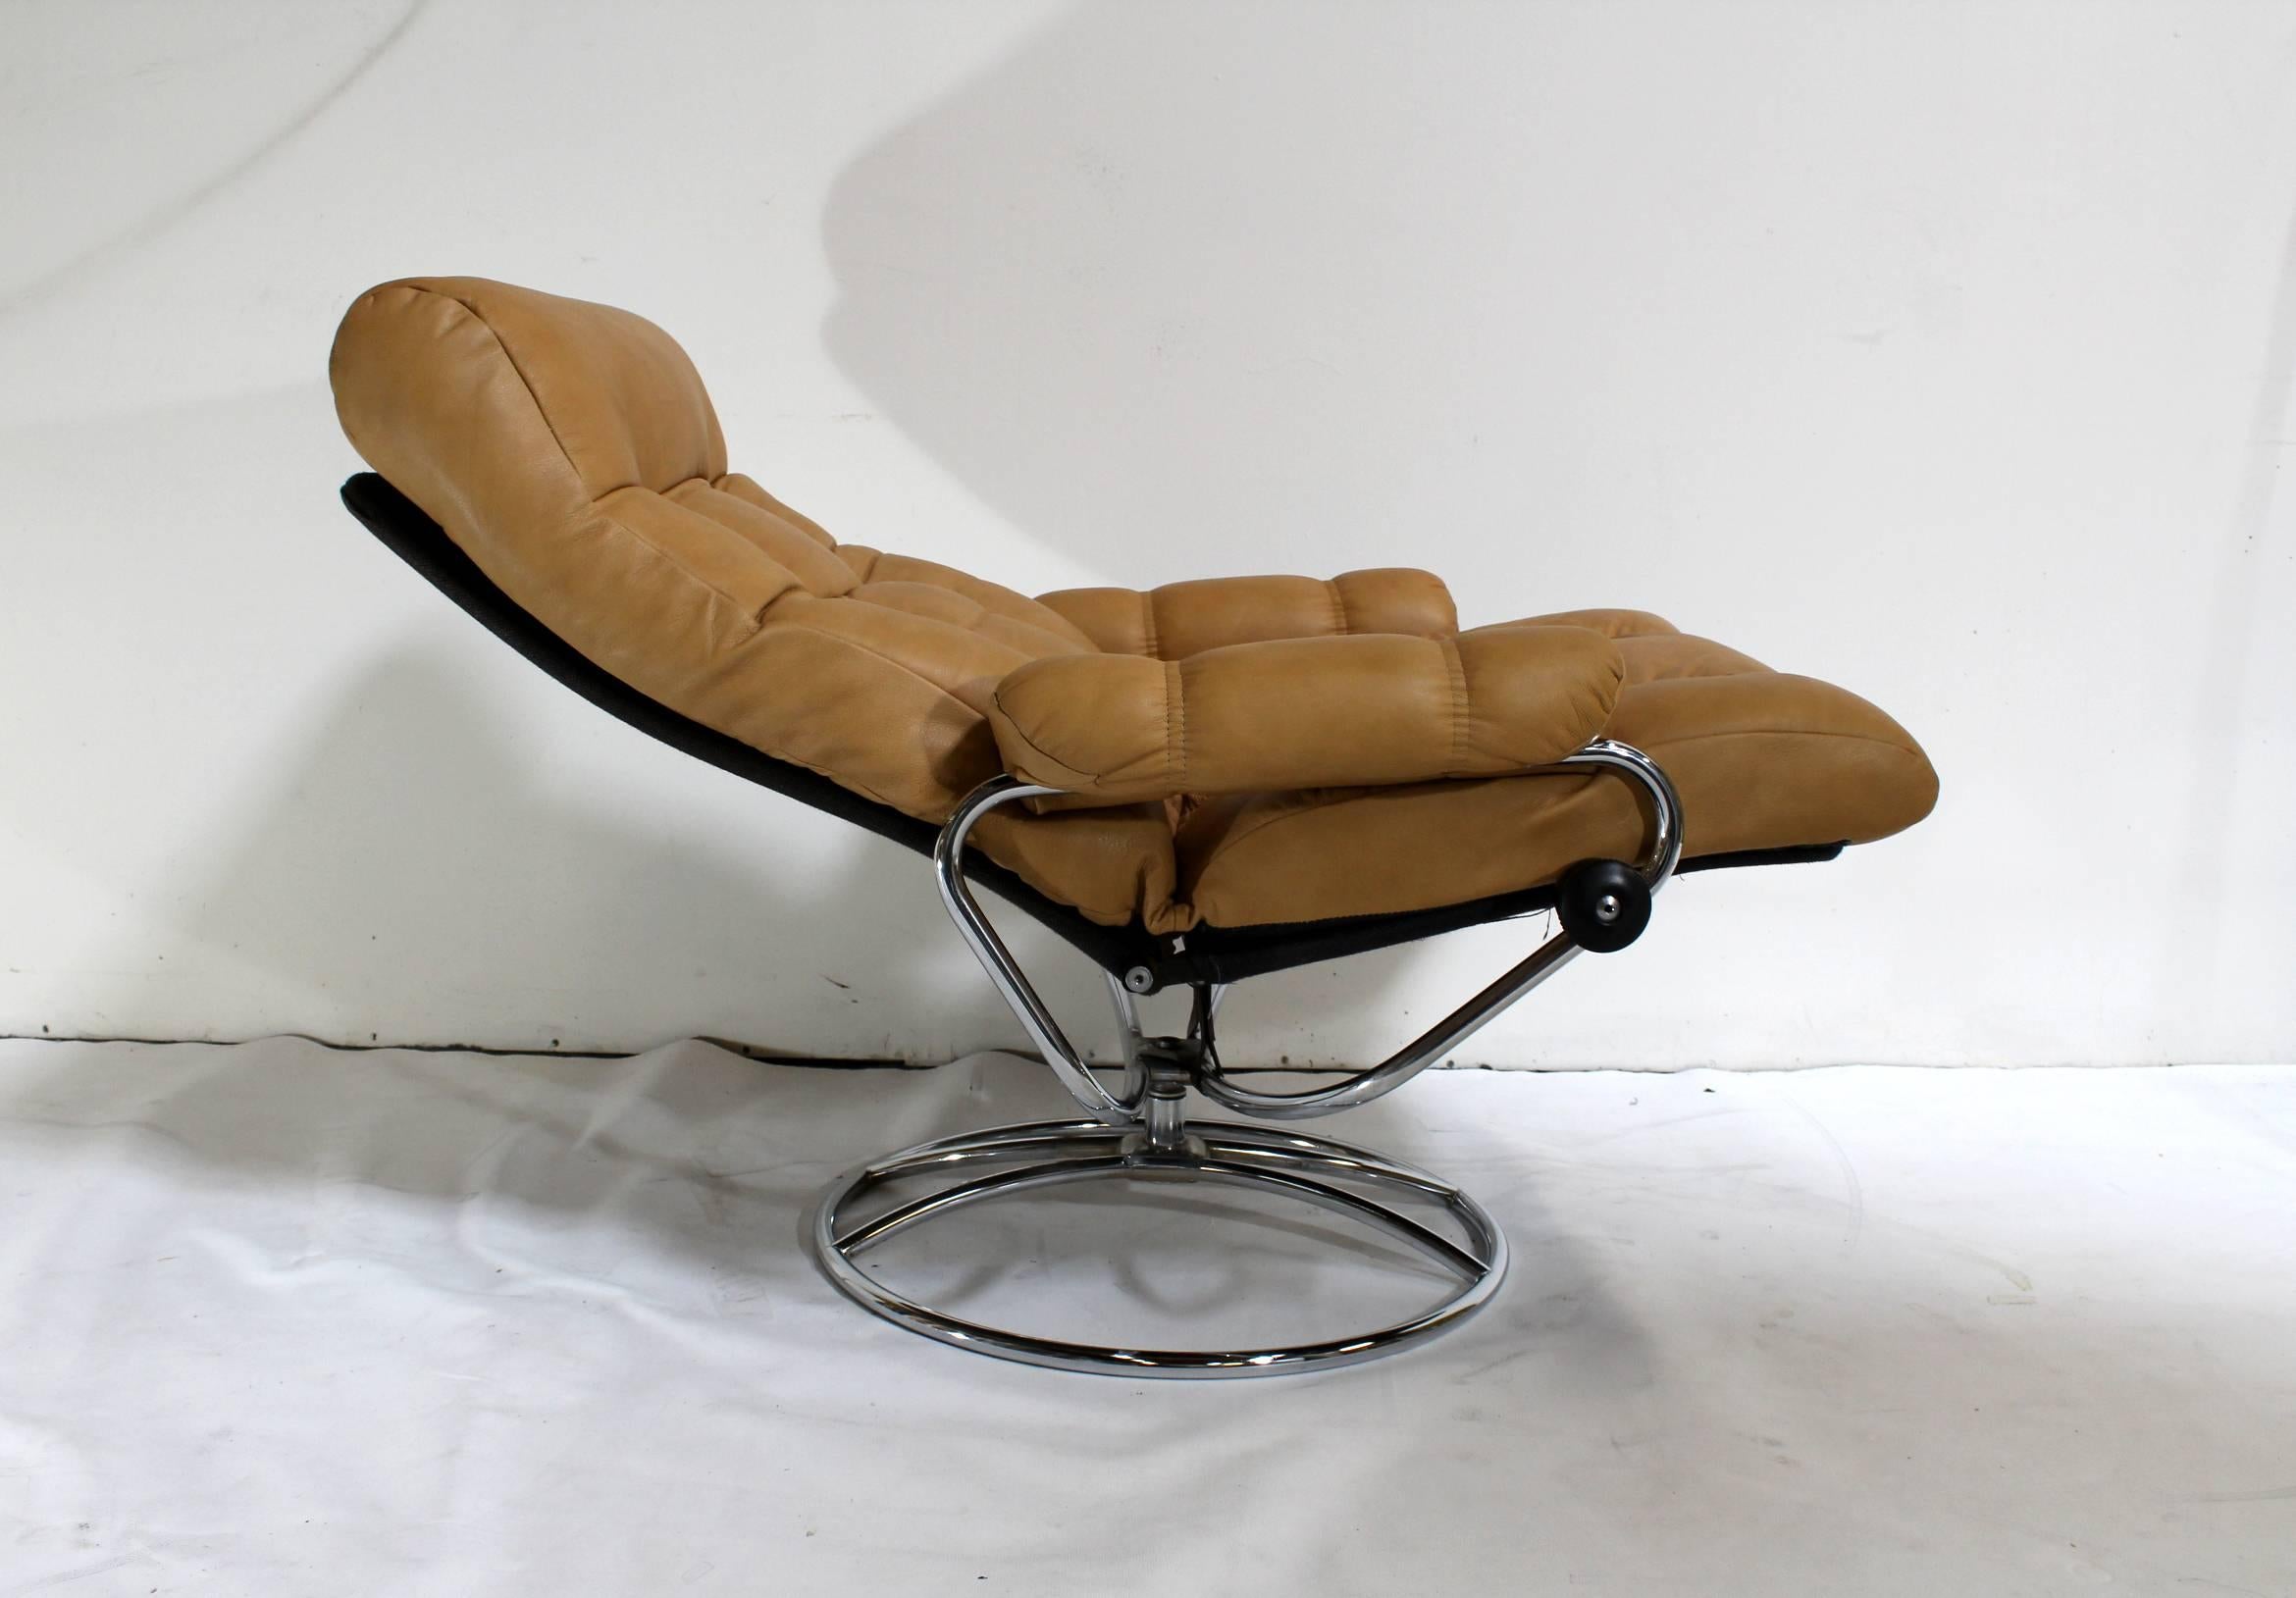 20th Century Scandinavian Mid-Century Modern Reclining Lounge Chairs and Ottomans by Ekornes